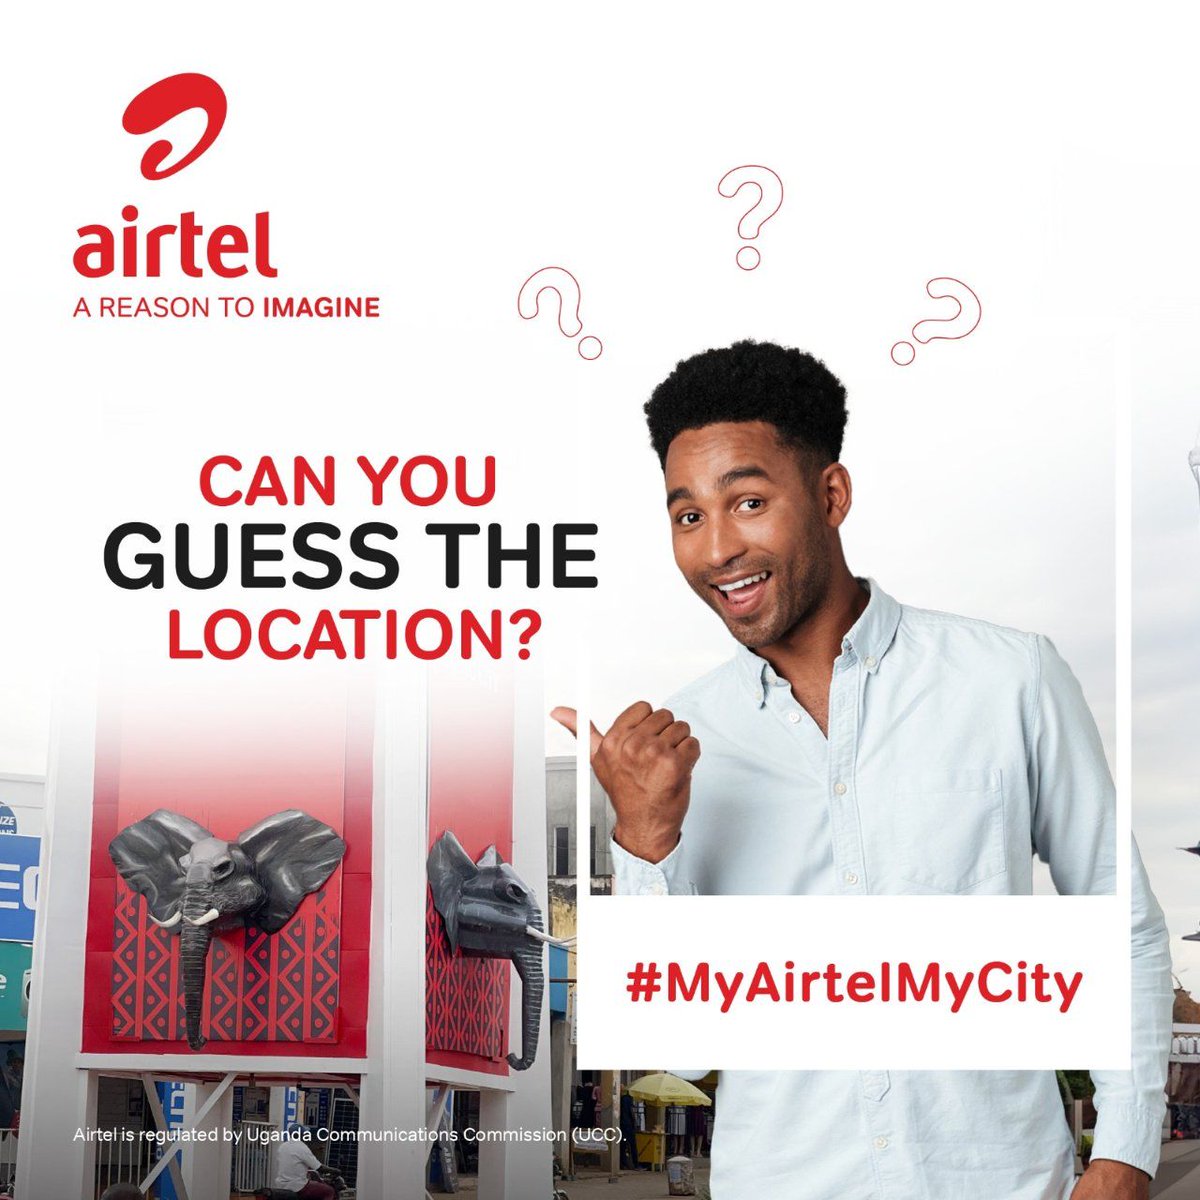 Do you know the location today guess the location of Airtel clock tower and stand a chance to win. 10 lucky winners will get 5.5 GB Weekly Data Bundle Follow Airtel on TikTok to win vm.tiktok.com/ZM6rXnwnM/ #MyAirtelMyCity